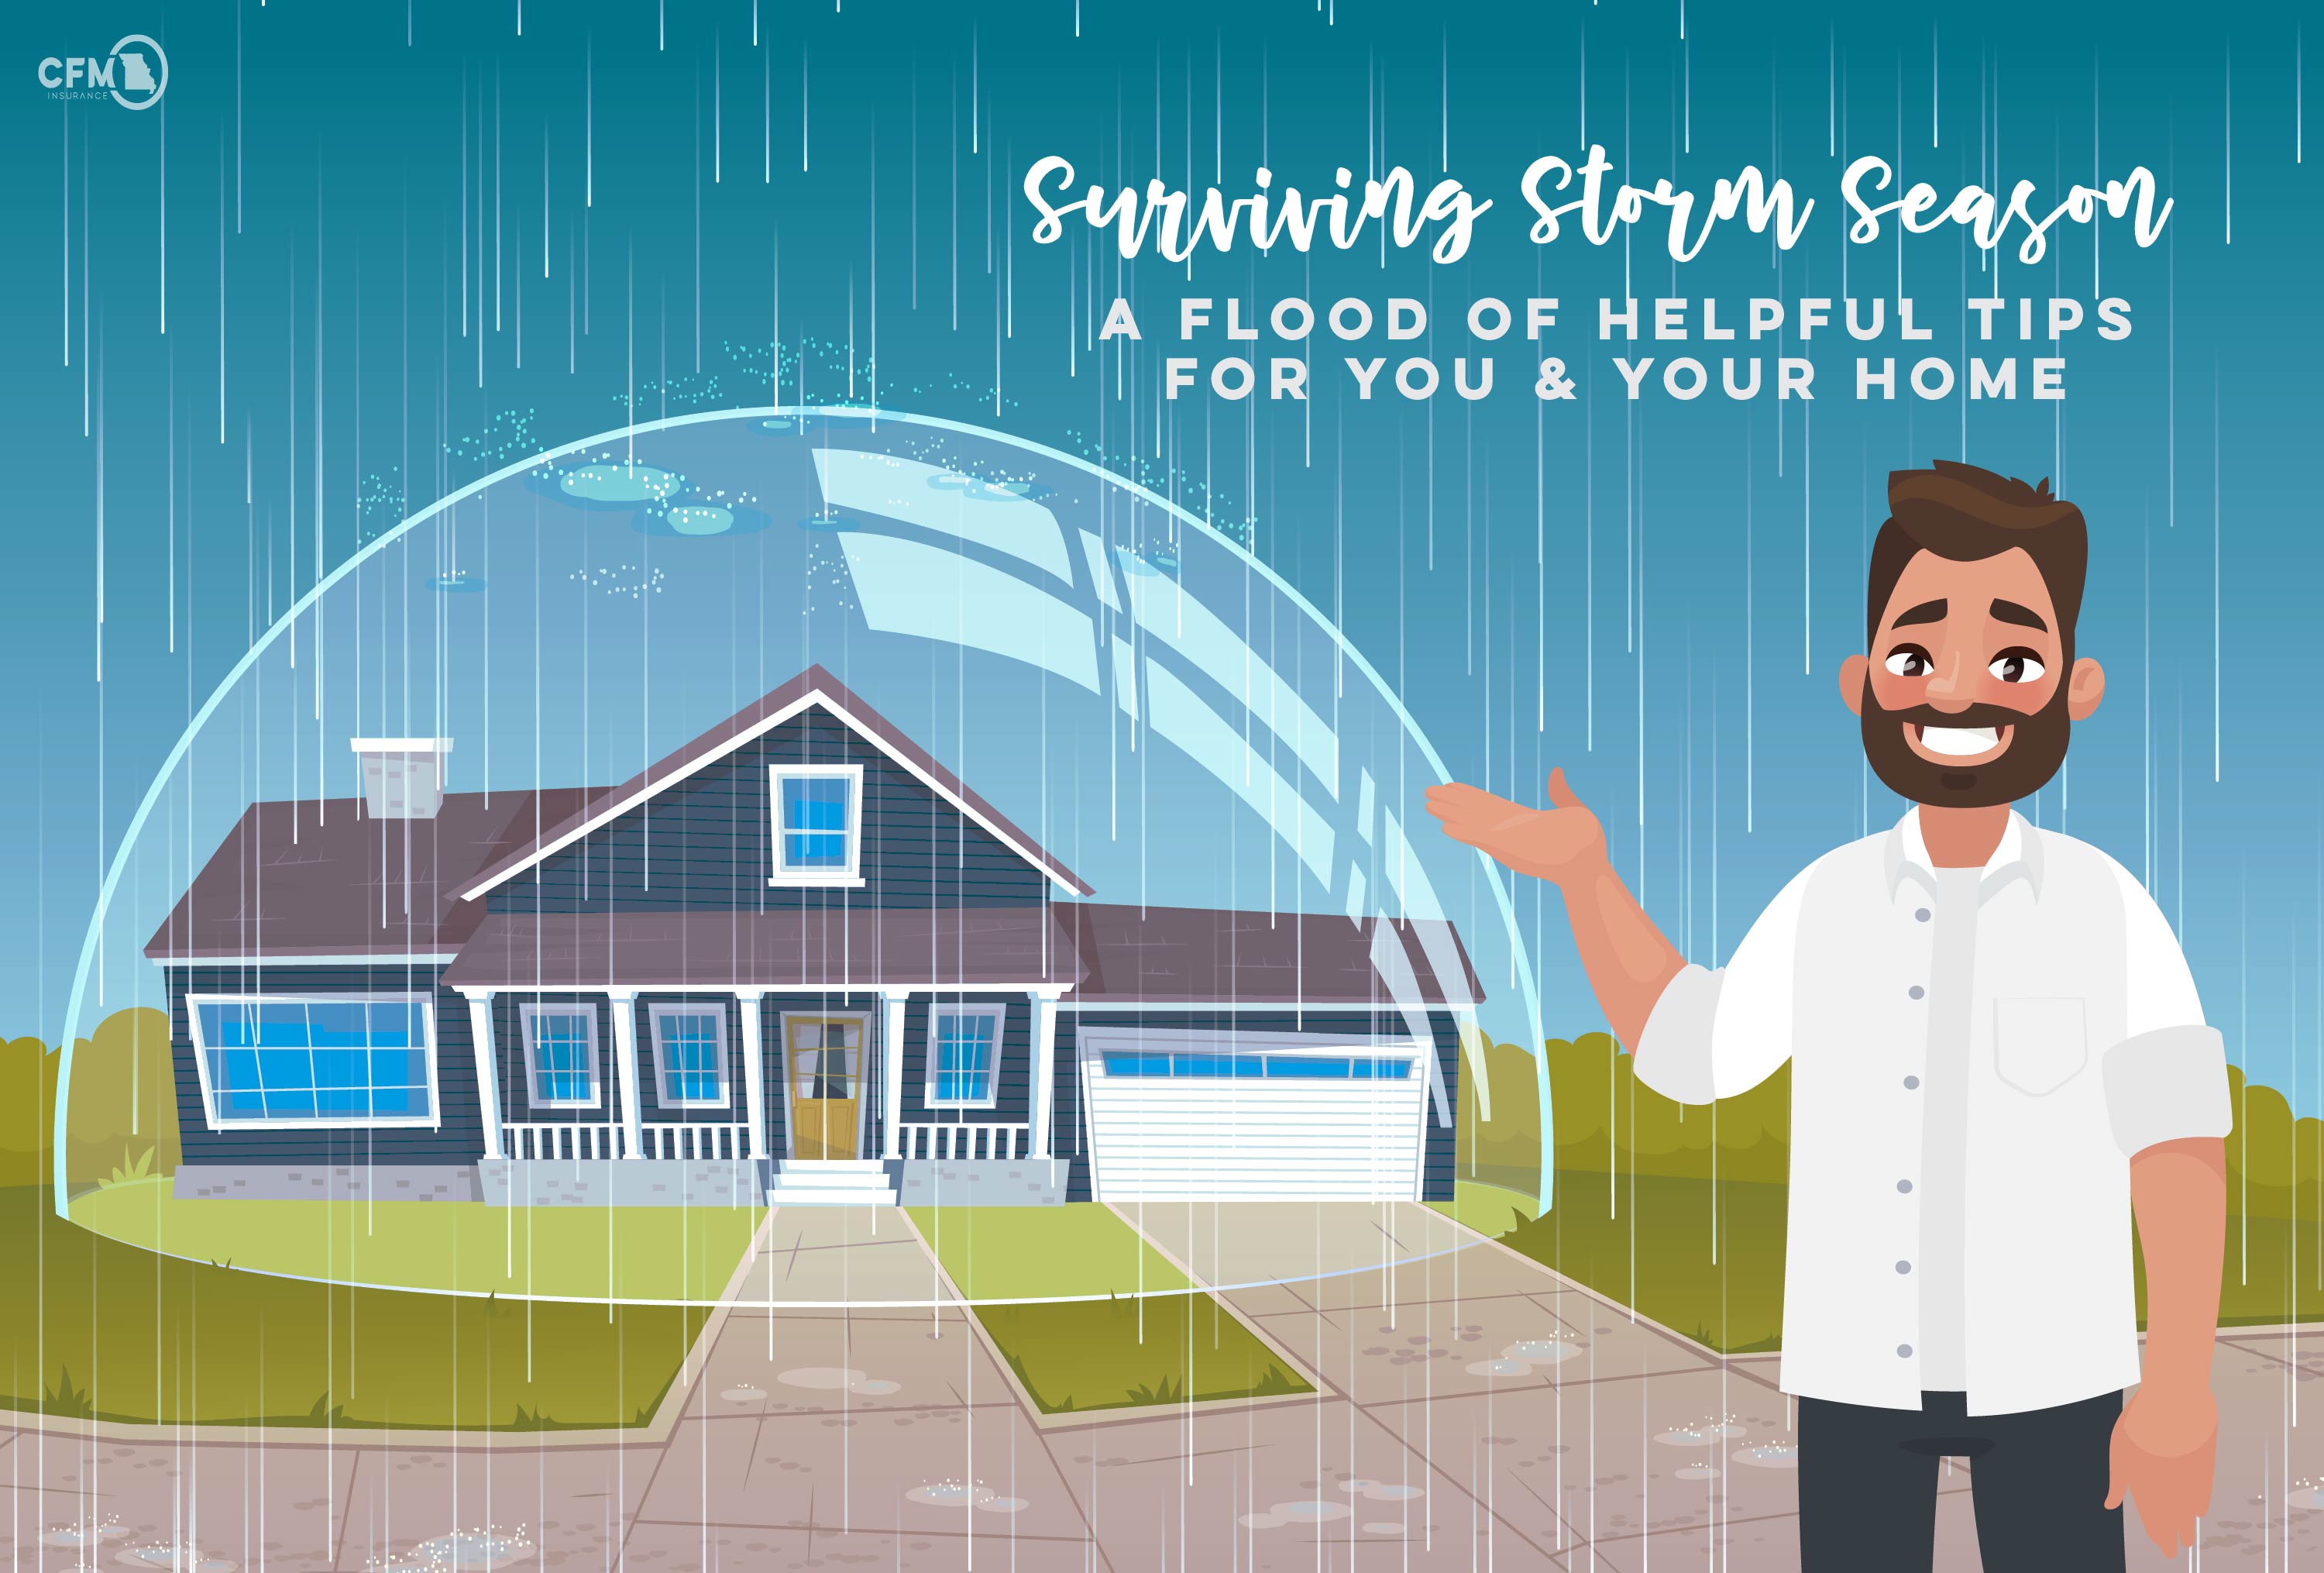 Spring Storm Season Is Here: How To Quickly Prep Your Home For Missouri's Unpredictable Warm Weather Patterns